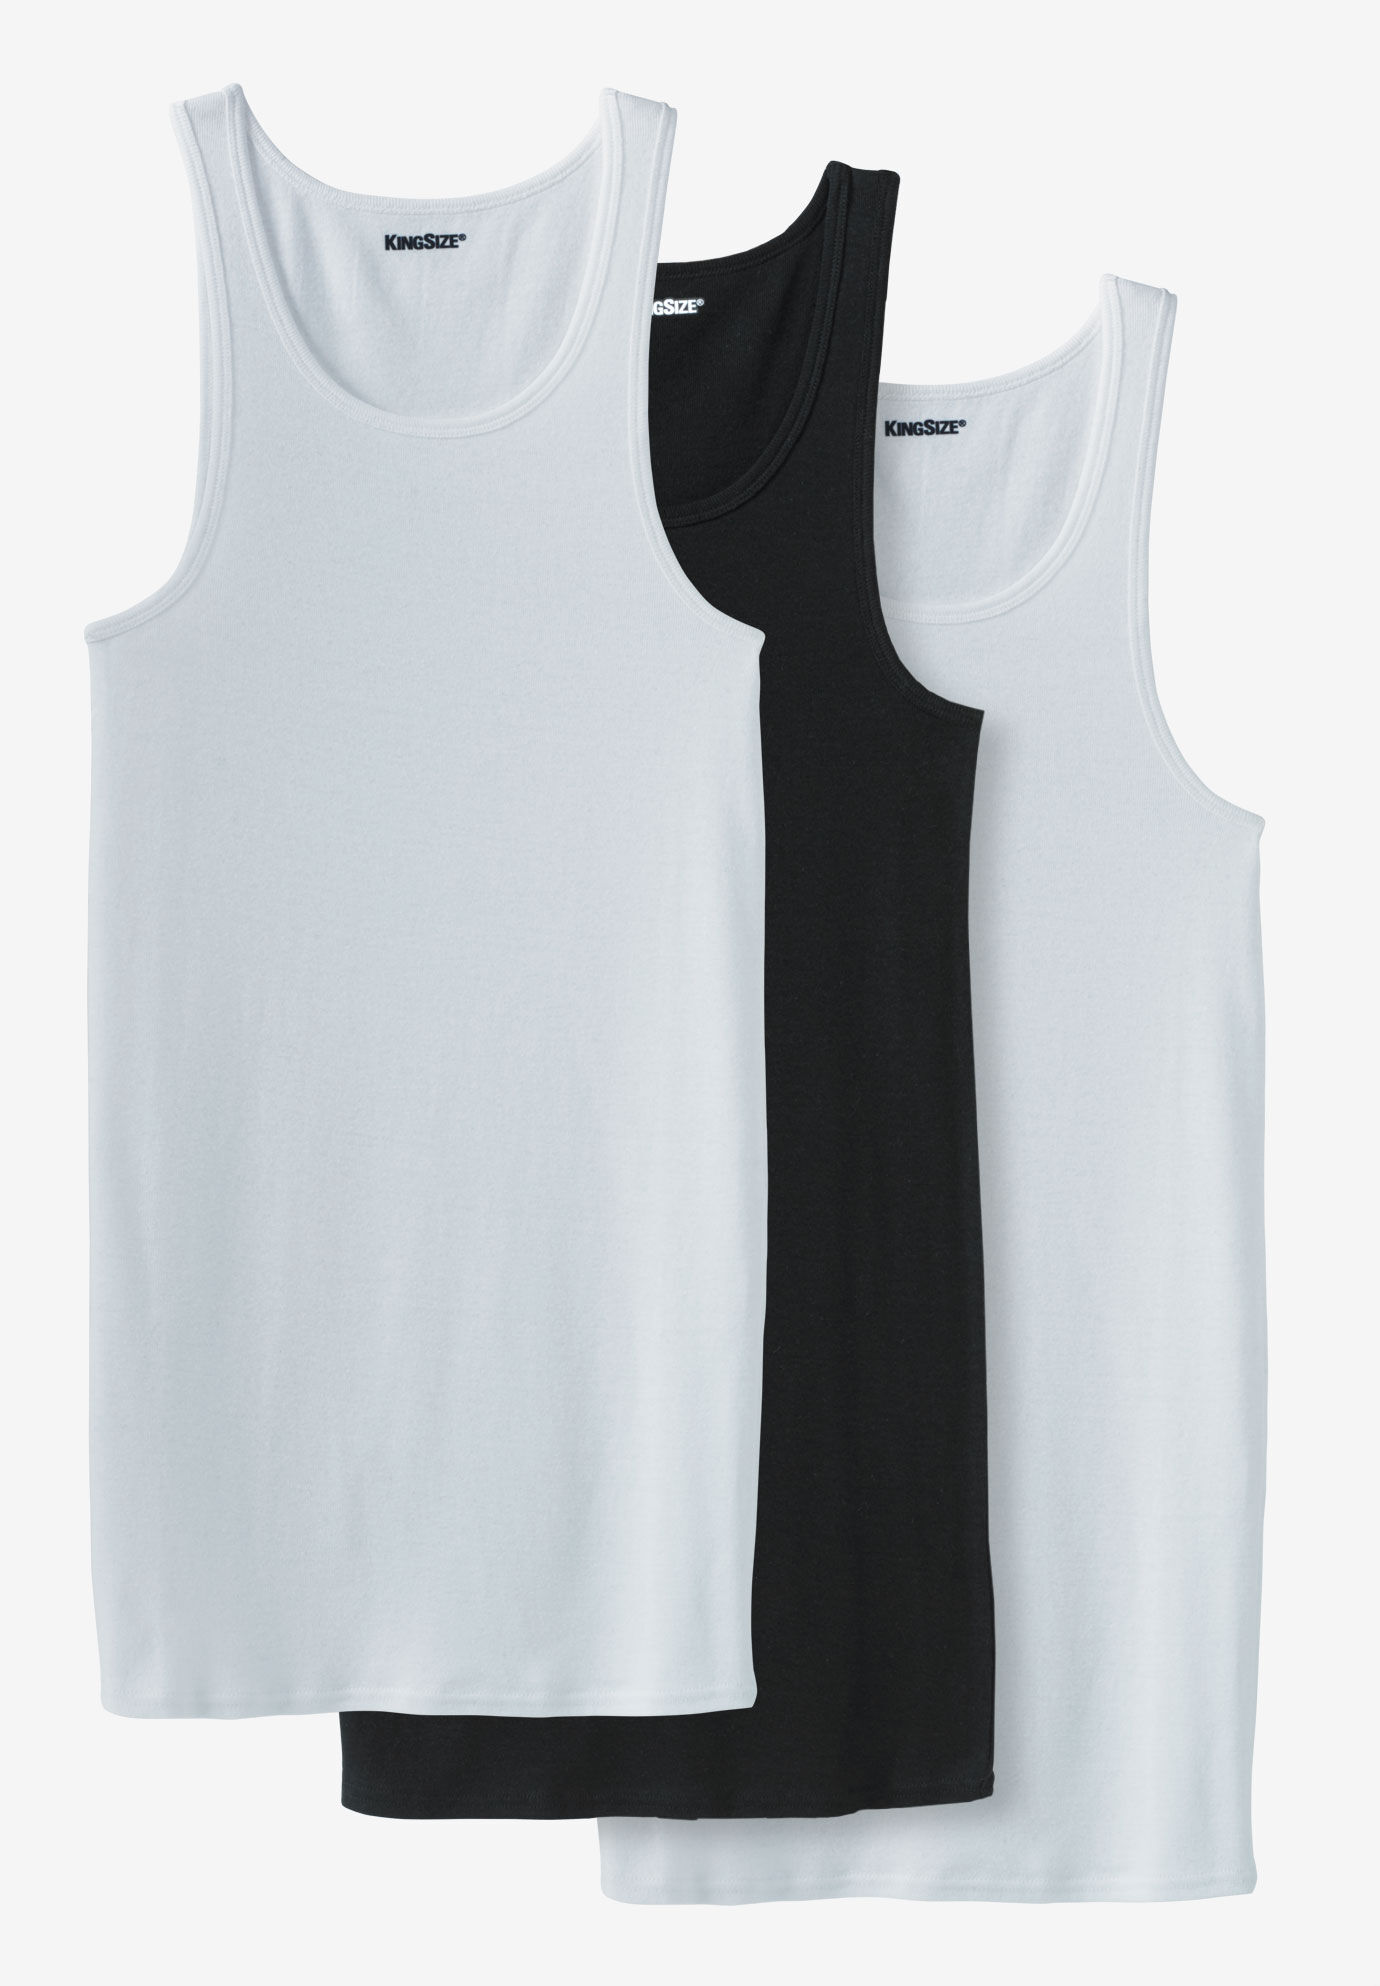 undershirts for tall guys